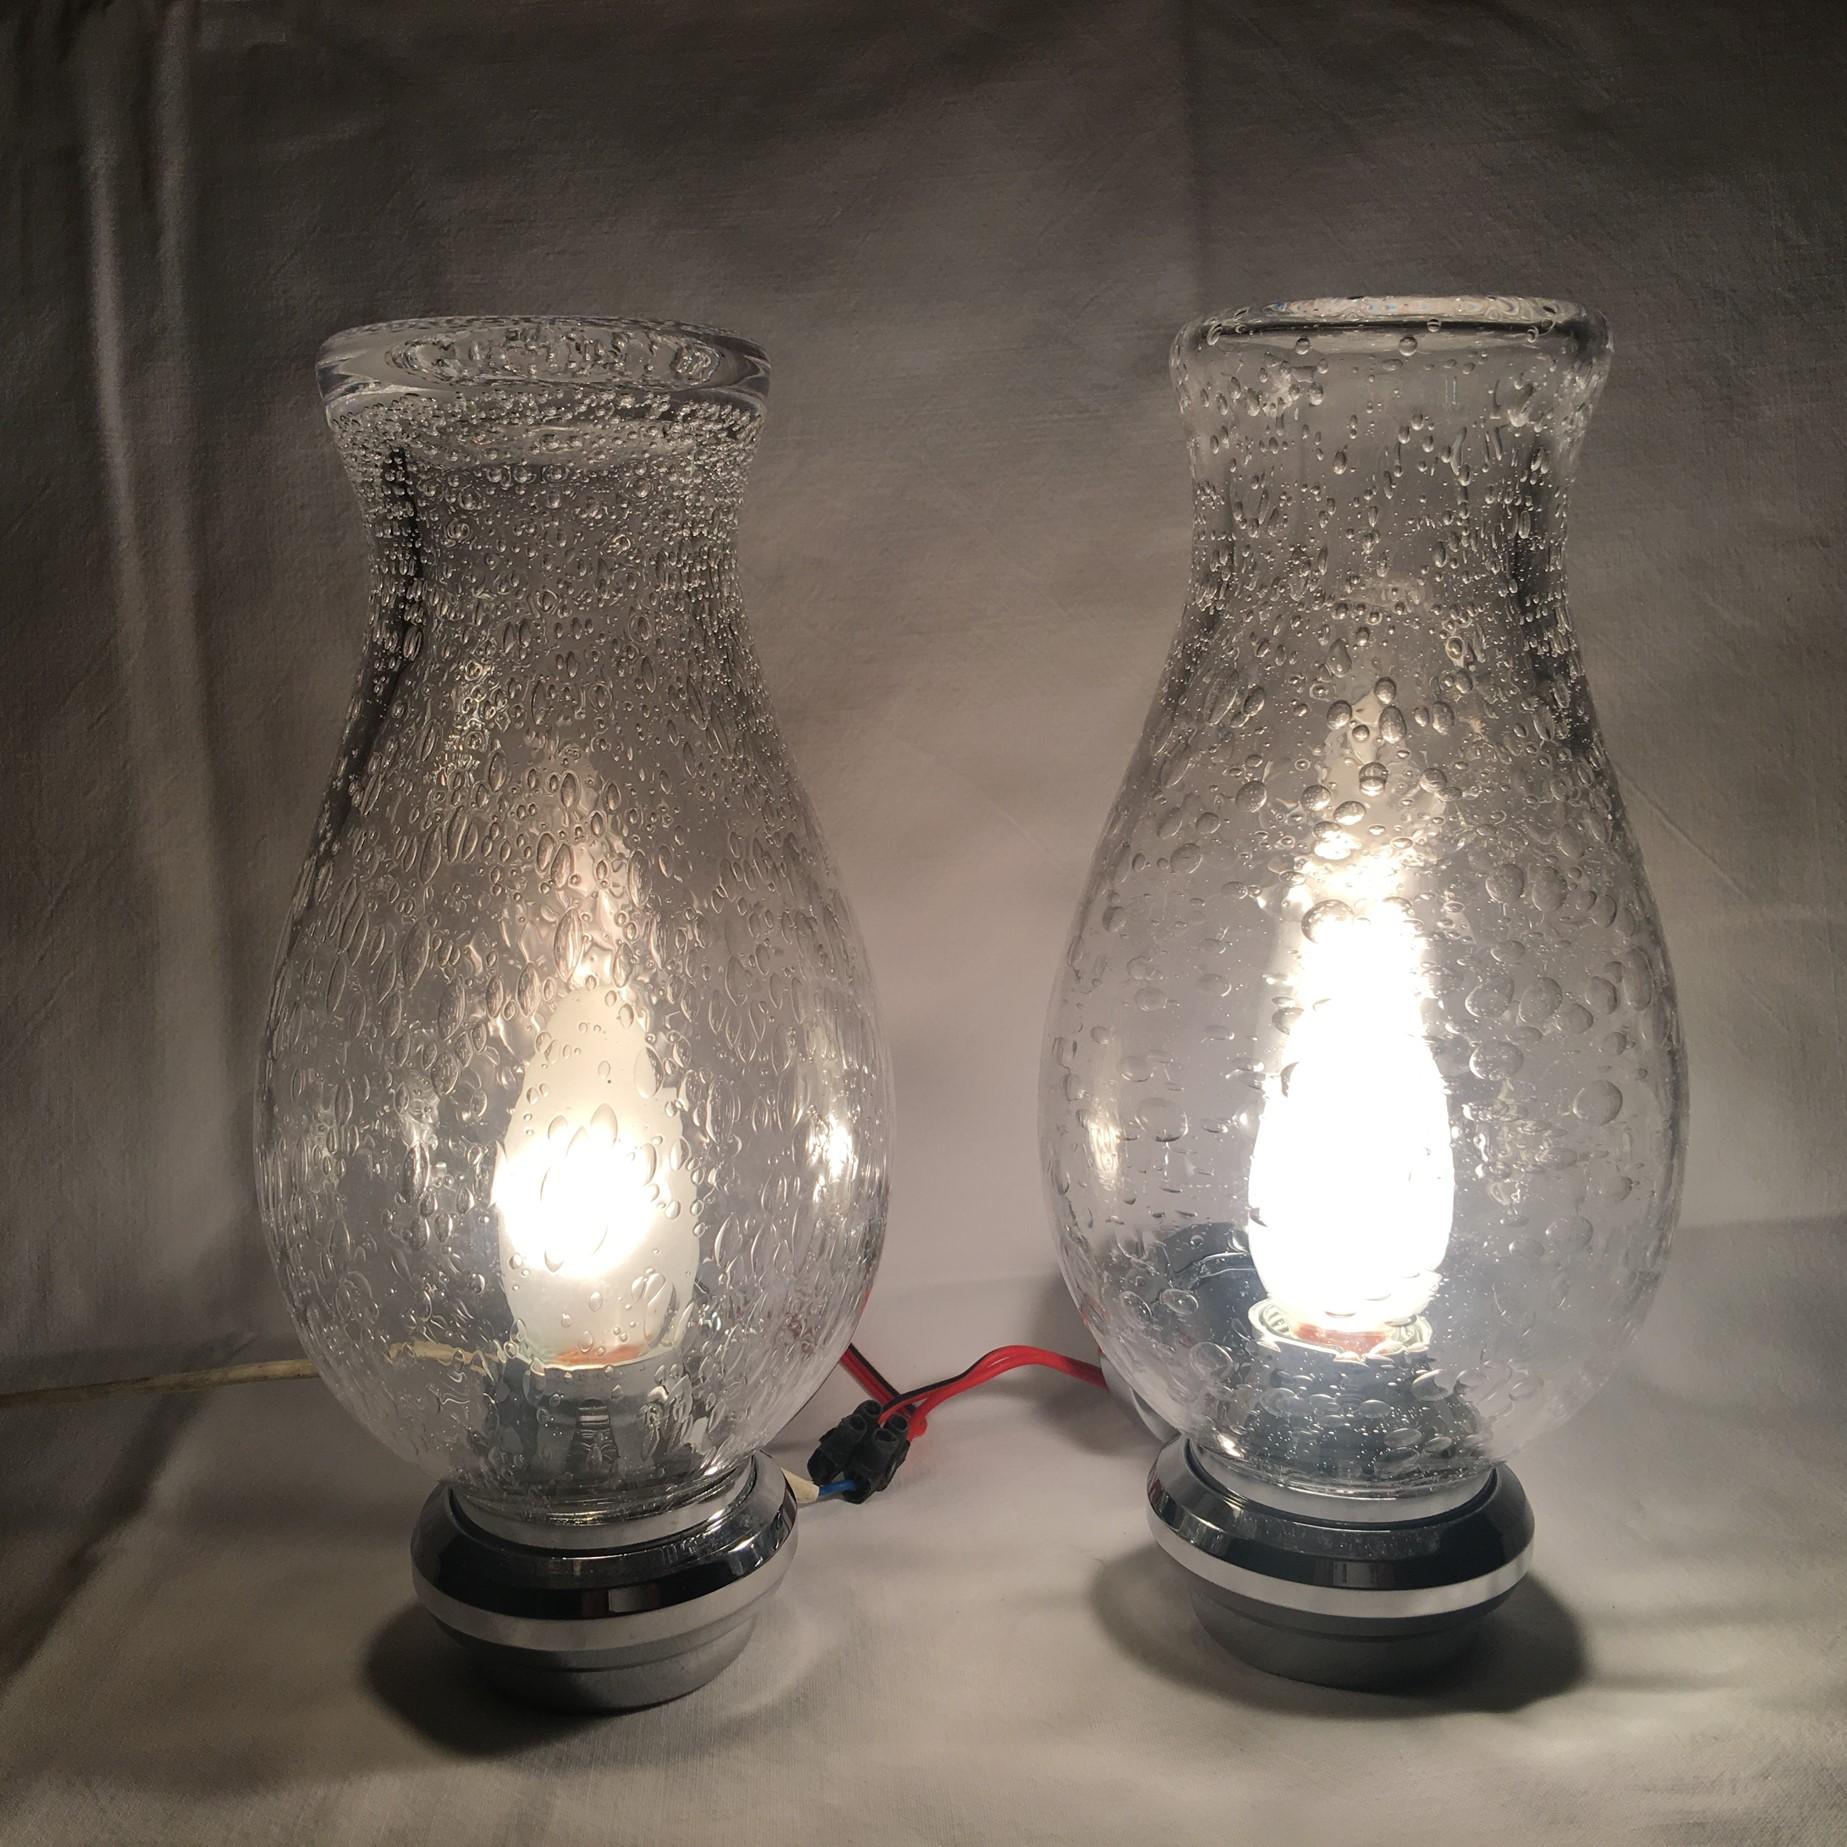 From the 1970s. A nice pair of chrome and bubble glass vanity sconces. Each fixture requires one European E 14 candelabra bulb up to 40 Watts max. Nice chrome and glass effect when lit.